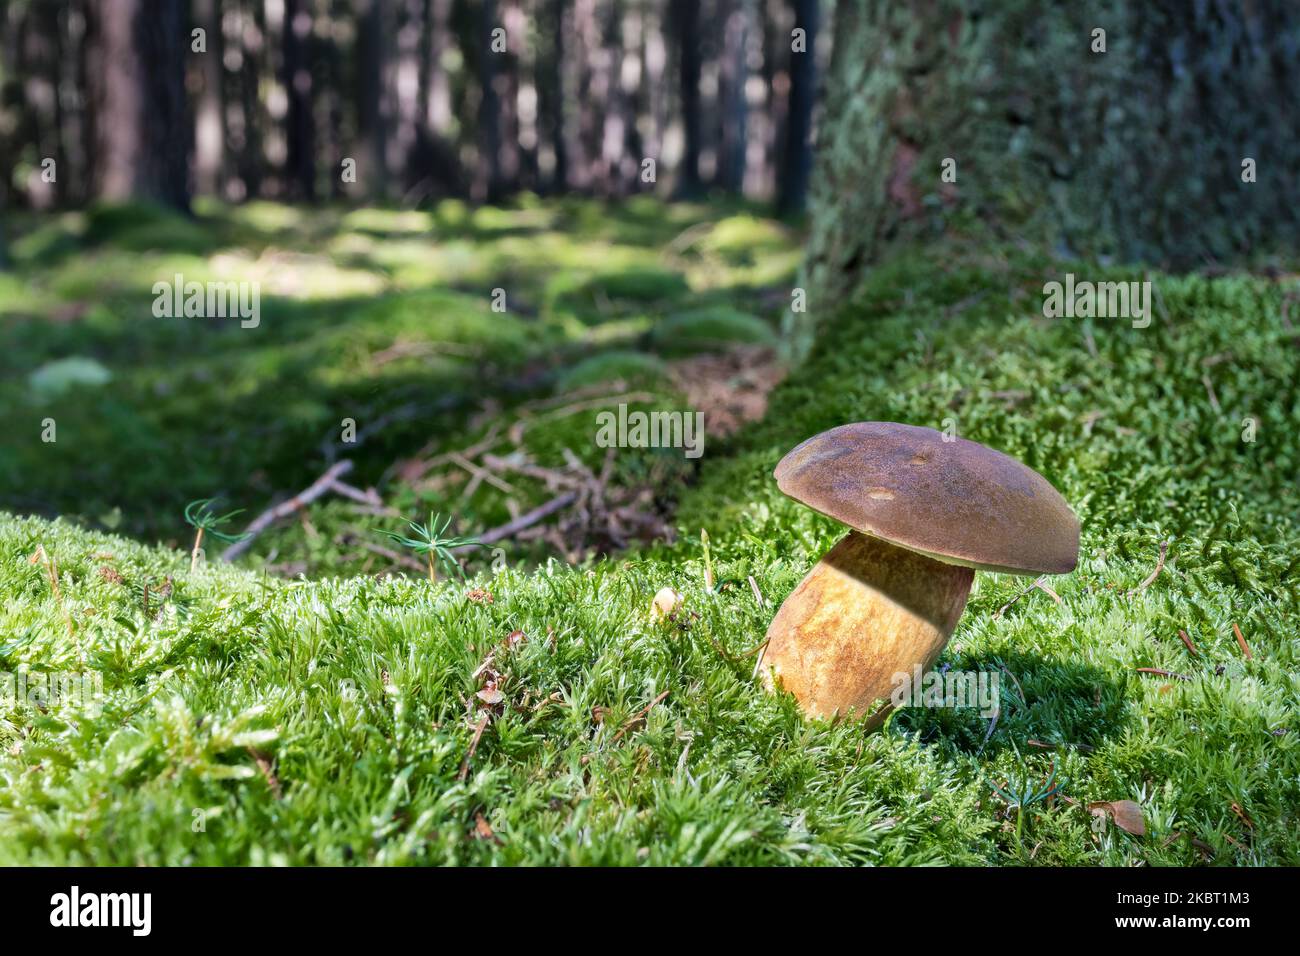 Beautiful pine or pinewood king bolete mushroom growing in nature green moss of autumn forest. Boletus pinophilus. Close-up of delicious edible fungus. Stock Photo